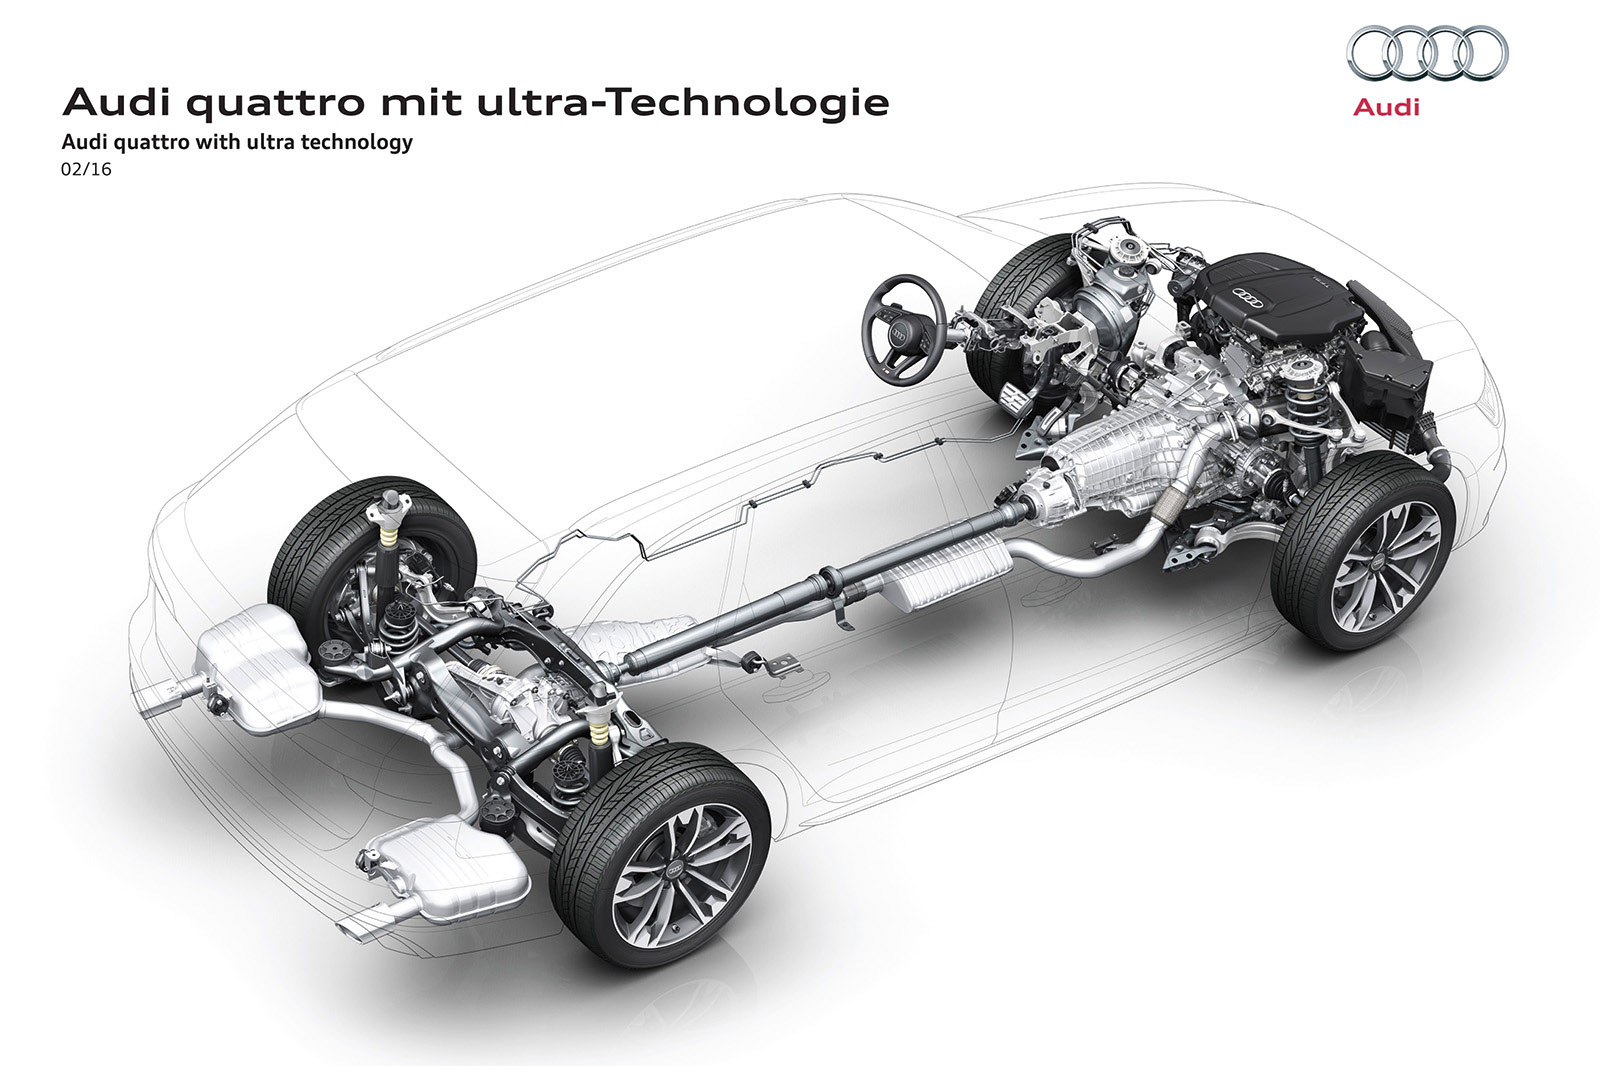 New Audi quattro ultra four-wheel drive system detailed